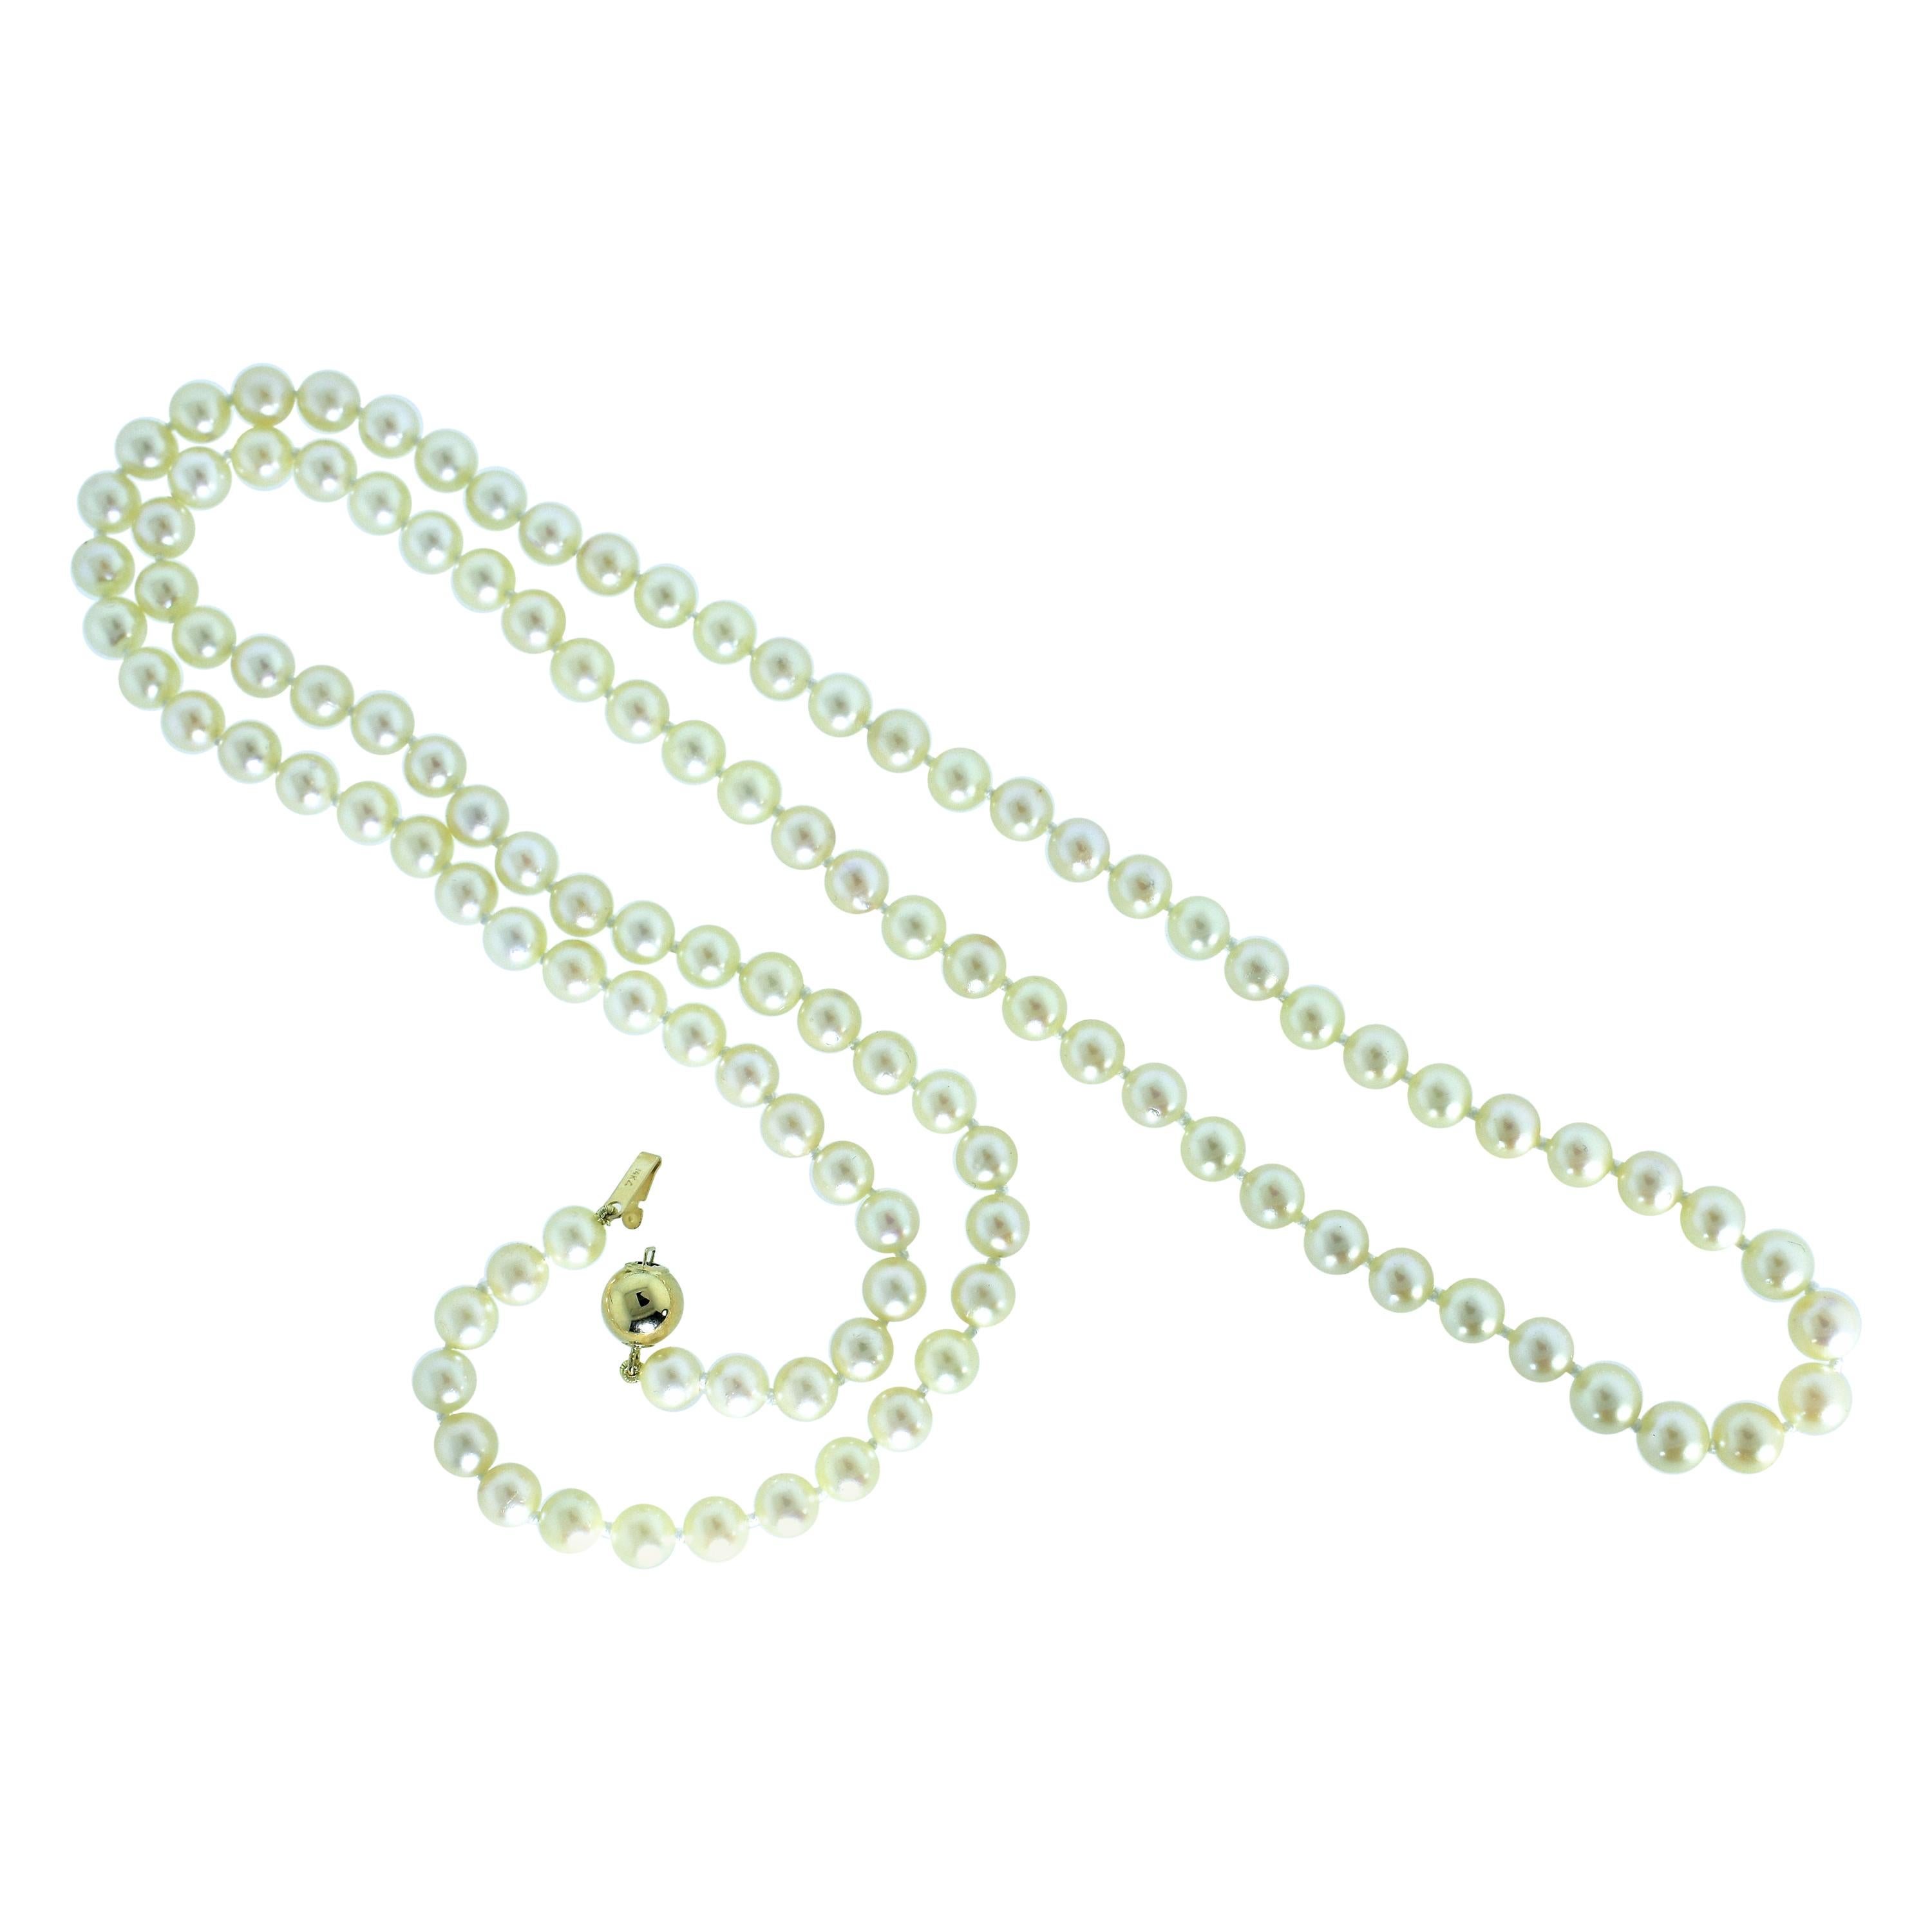 Japanese Akoya cultured strand, 32 inches in length, with 112 pearls and finished with a 14K clasp, the pearls are salt water, round with luster, they range in size from 6.02 mm up to 6.68 mm.  This strand can be worn double over or just one long